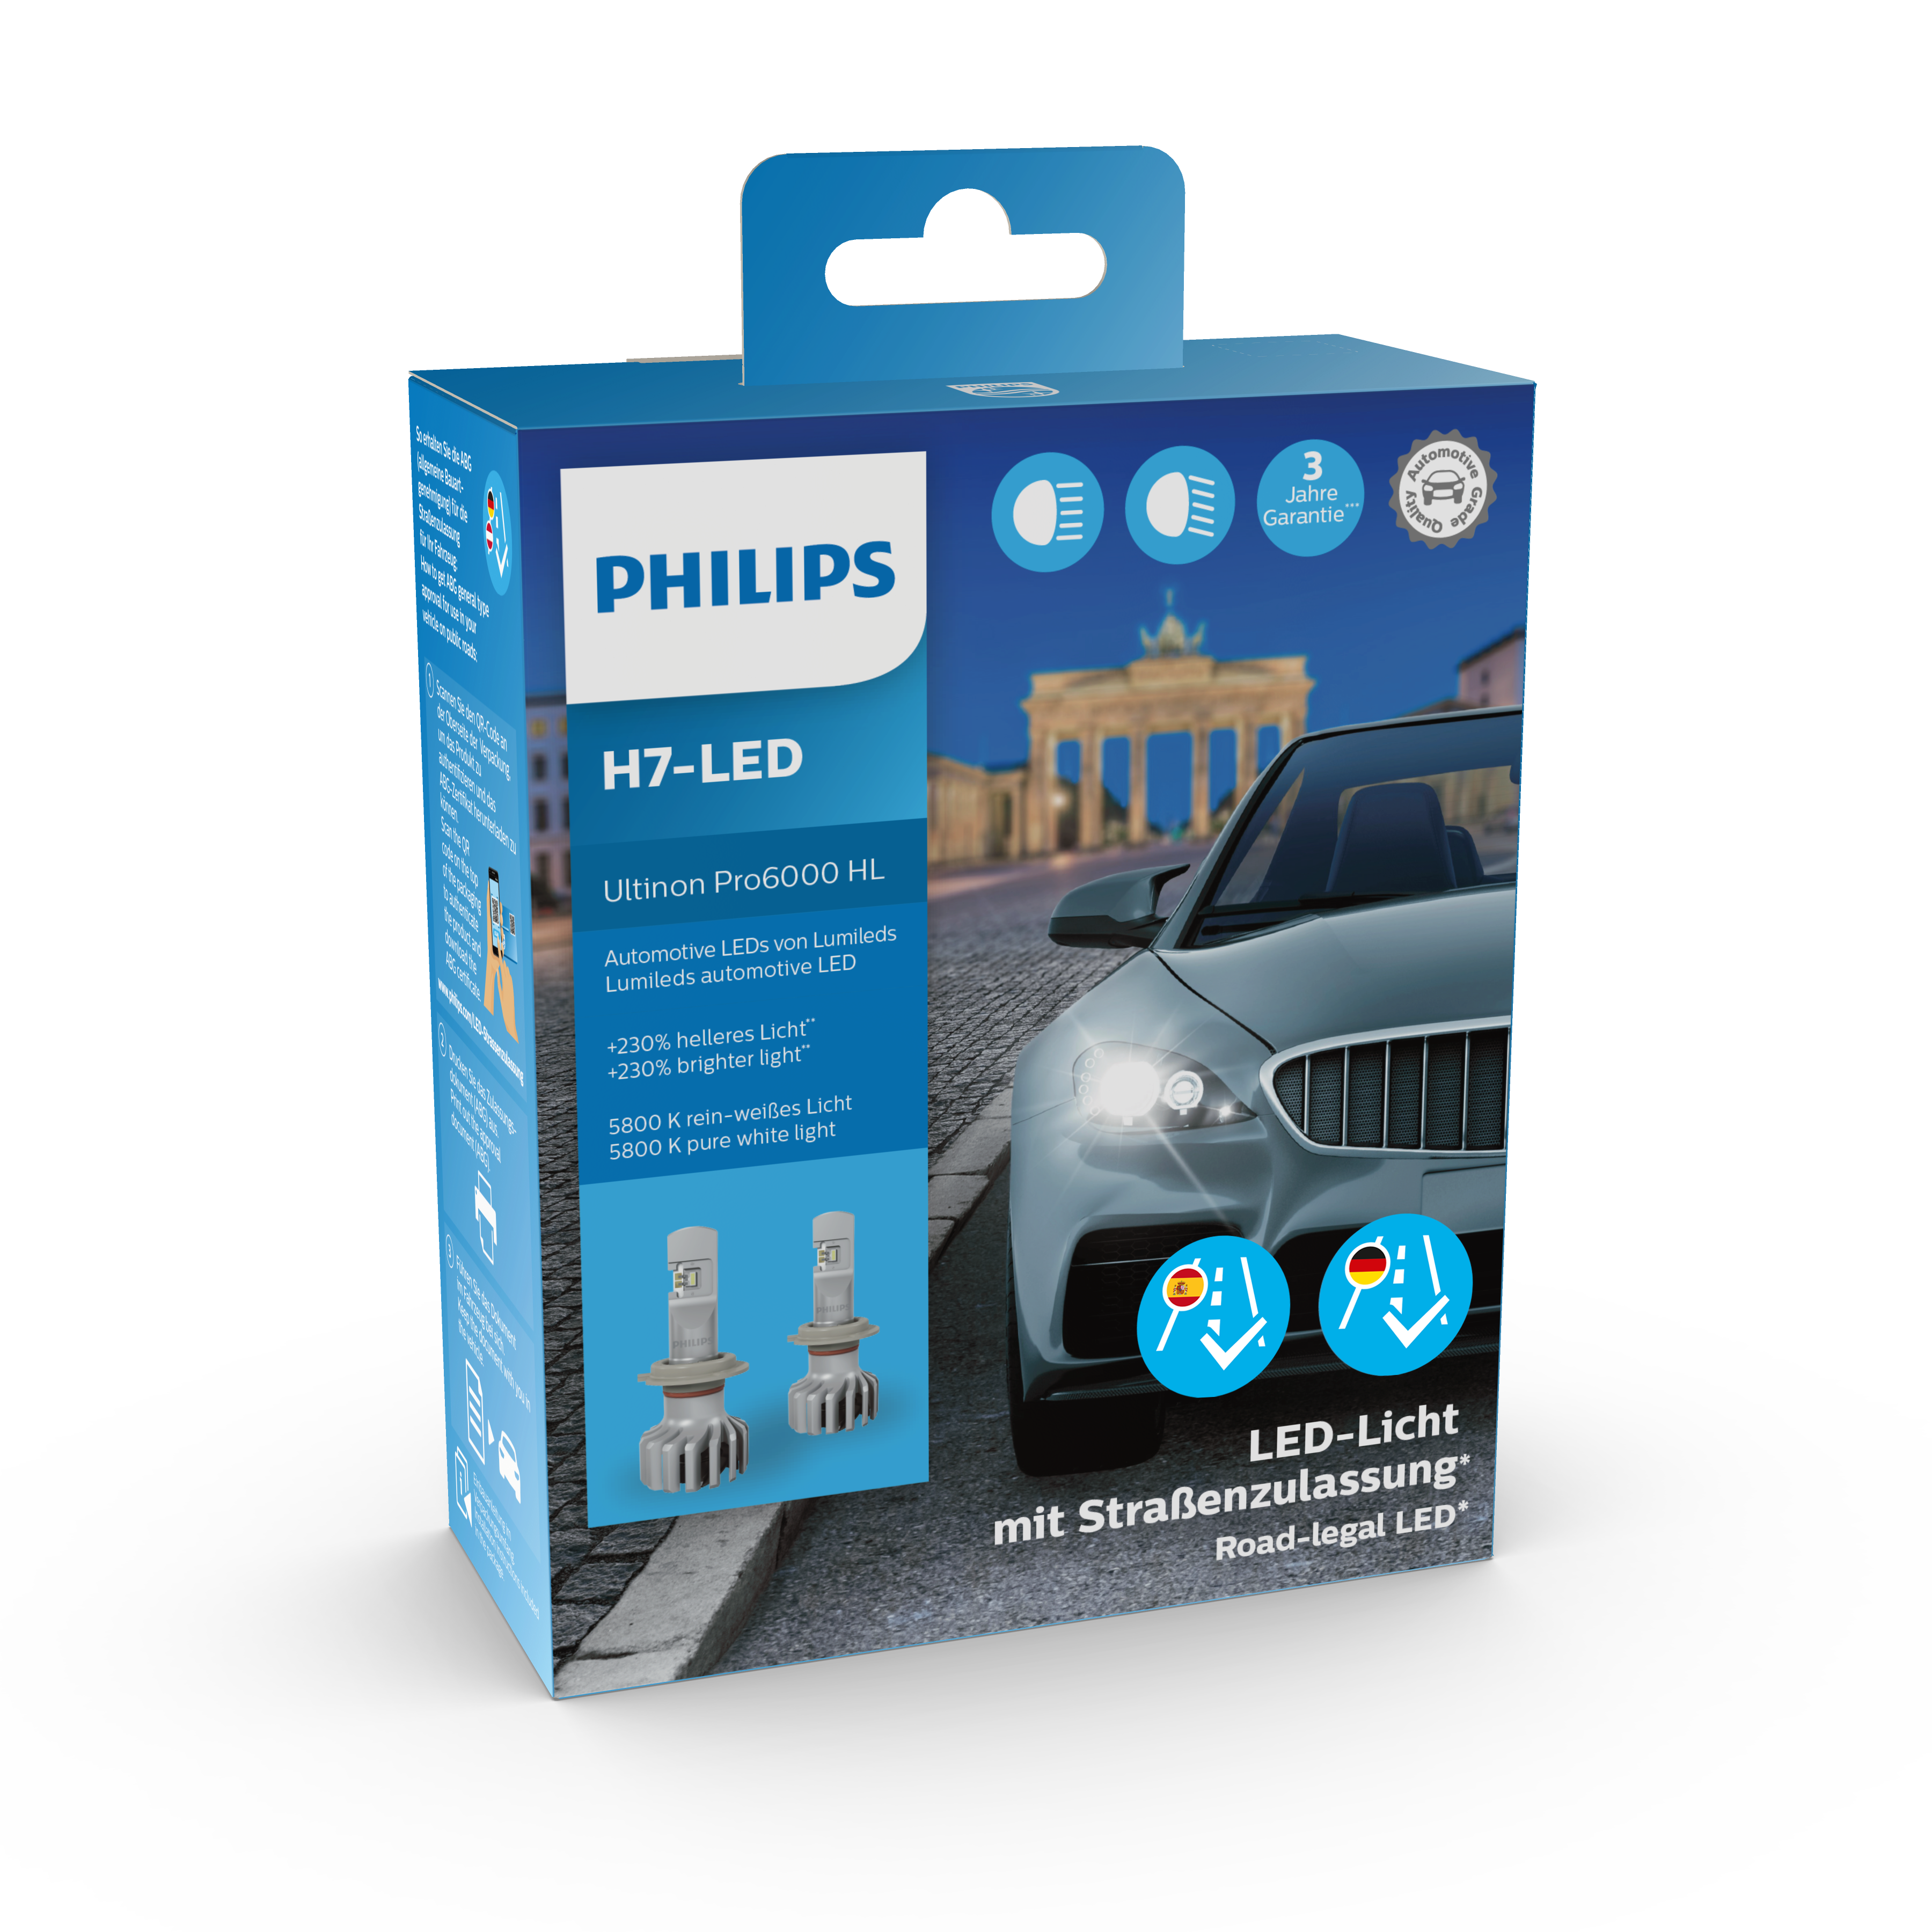 H7 LED Philips UltinonPro 6000 HL package